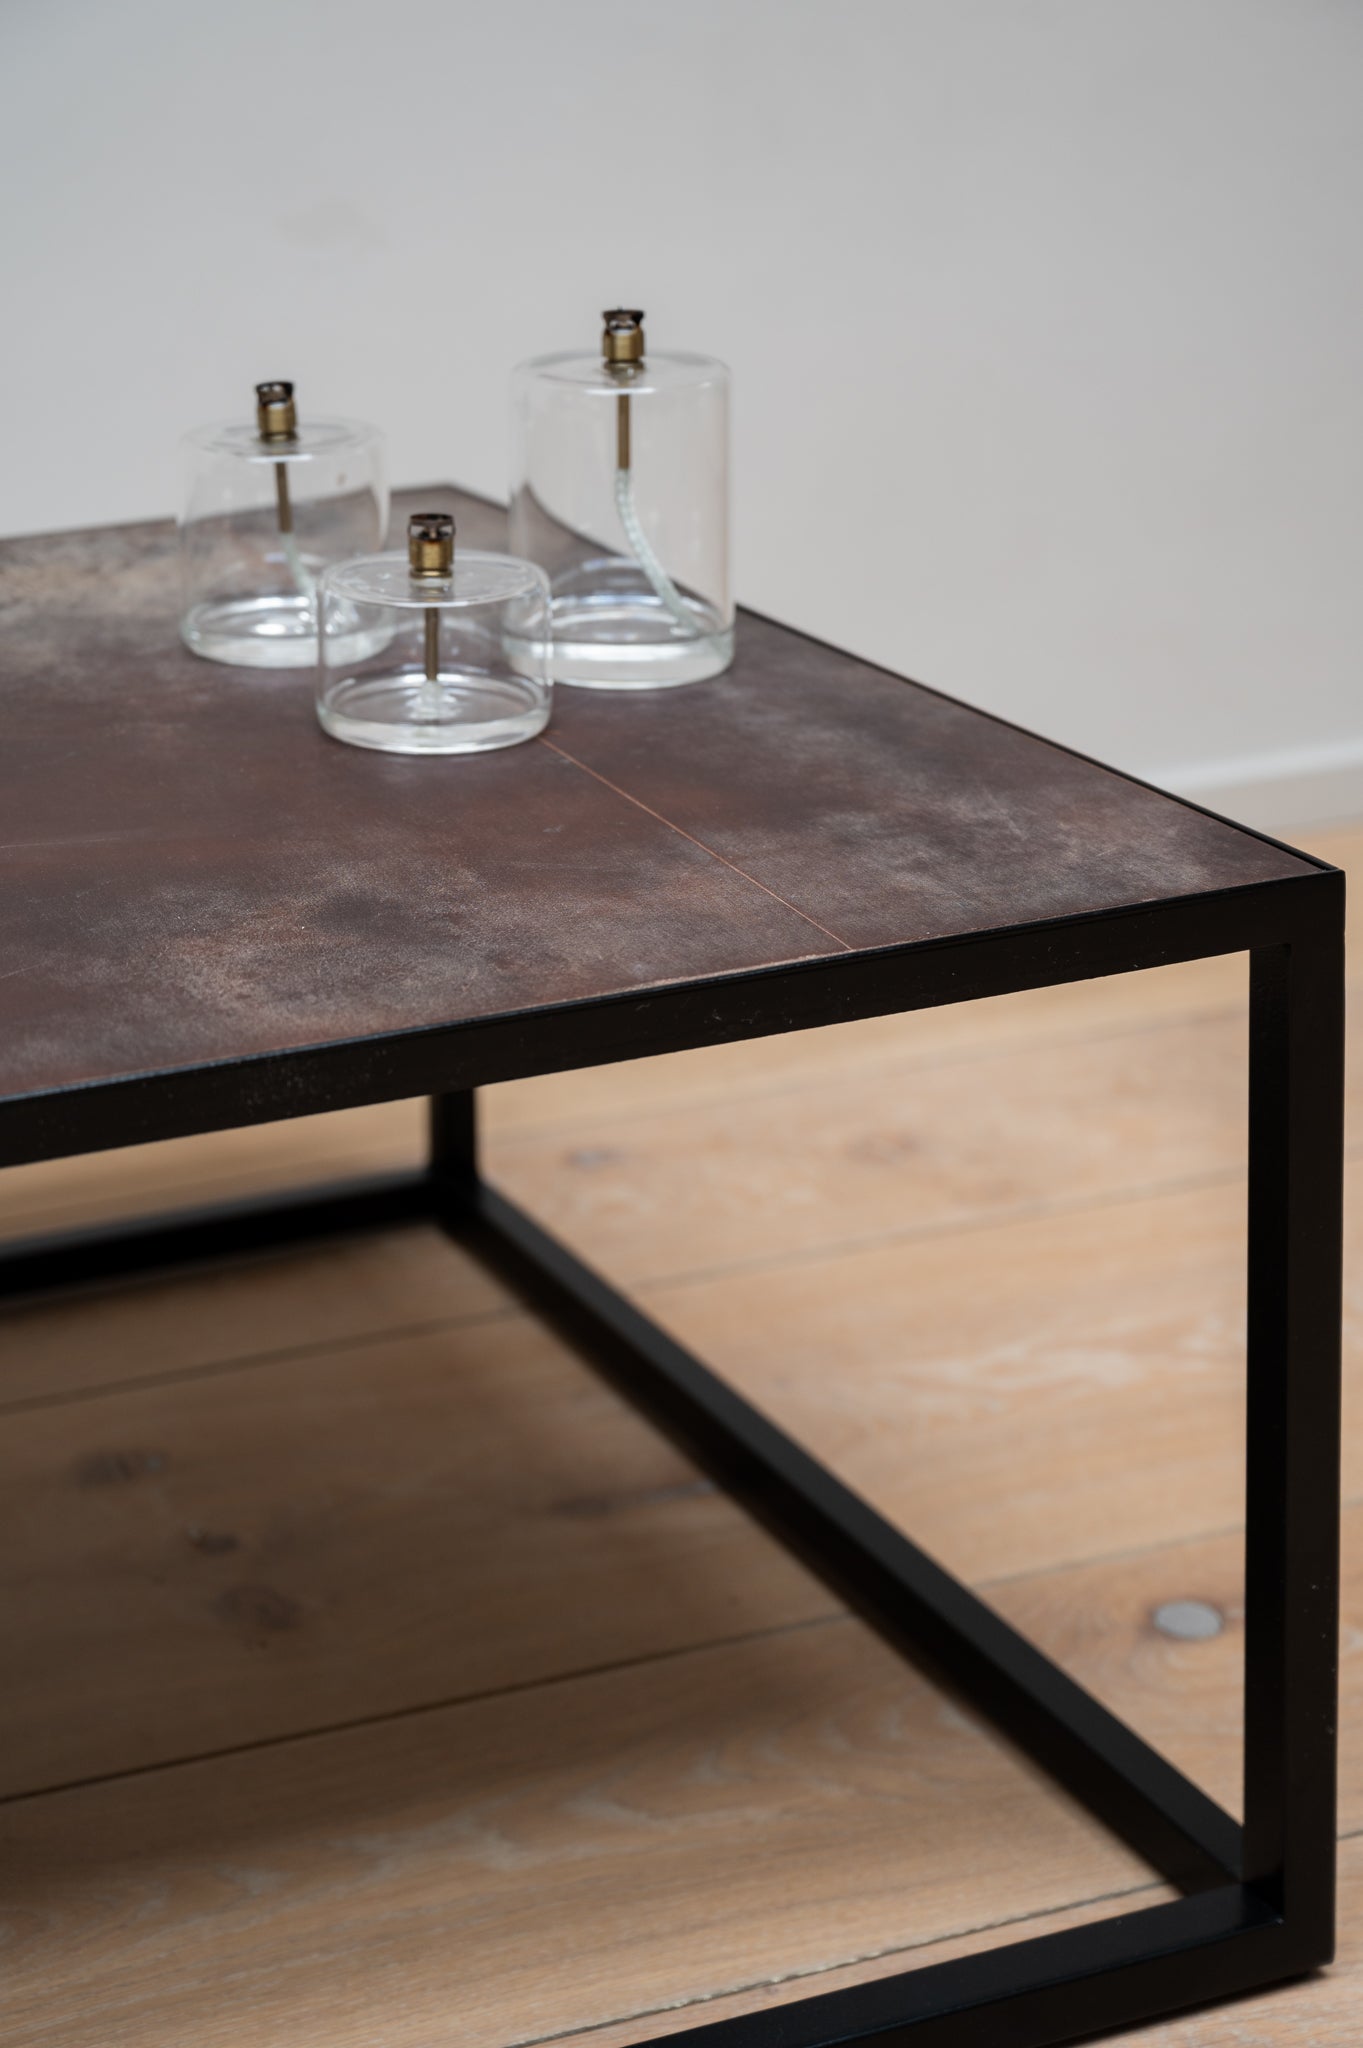 Close-up of the Mesa Nero Coffee Table by Heerenhuis with three sized of the Cyl Oil Lamp placed on it.